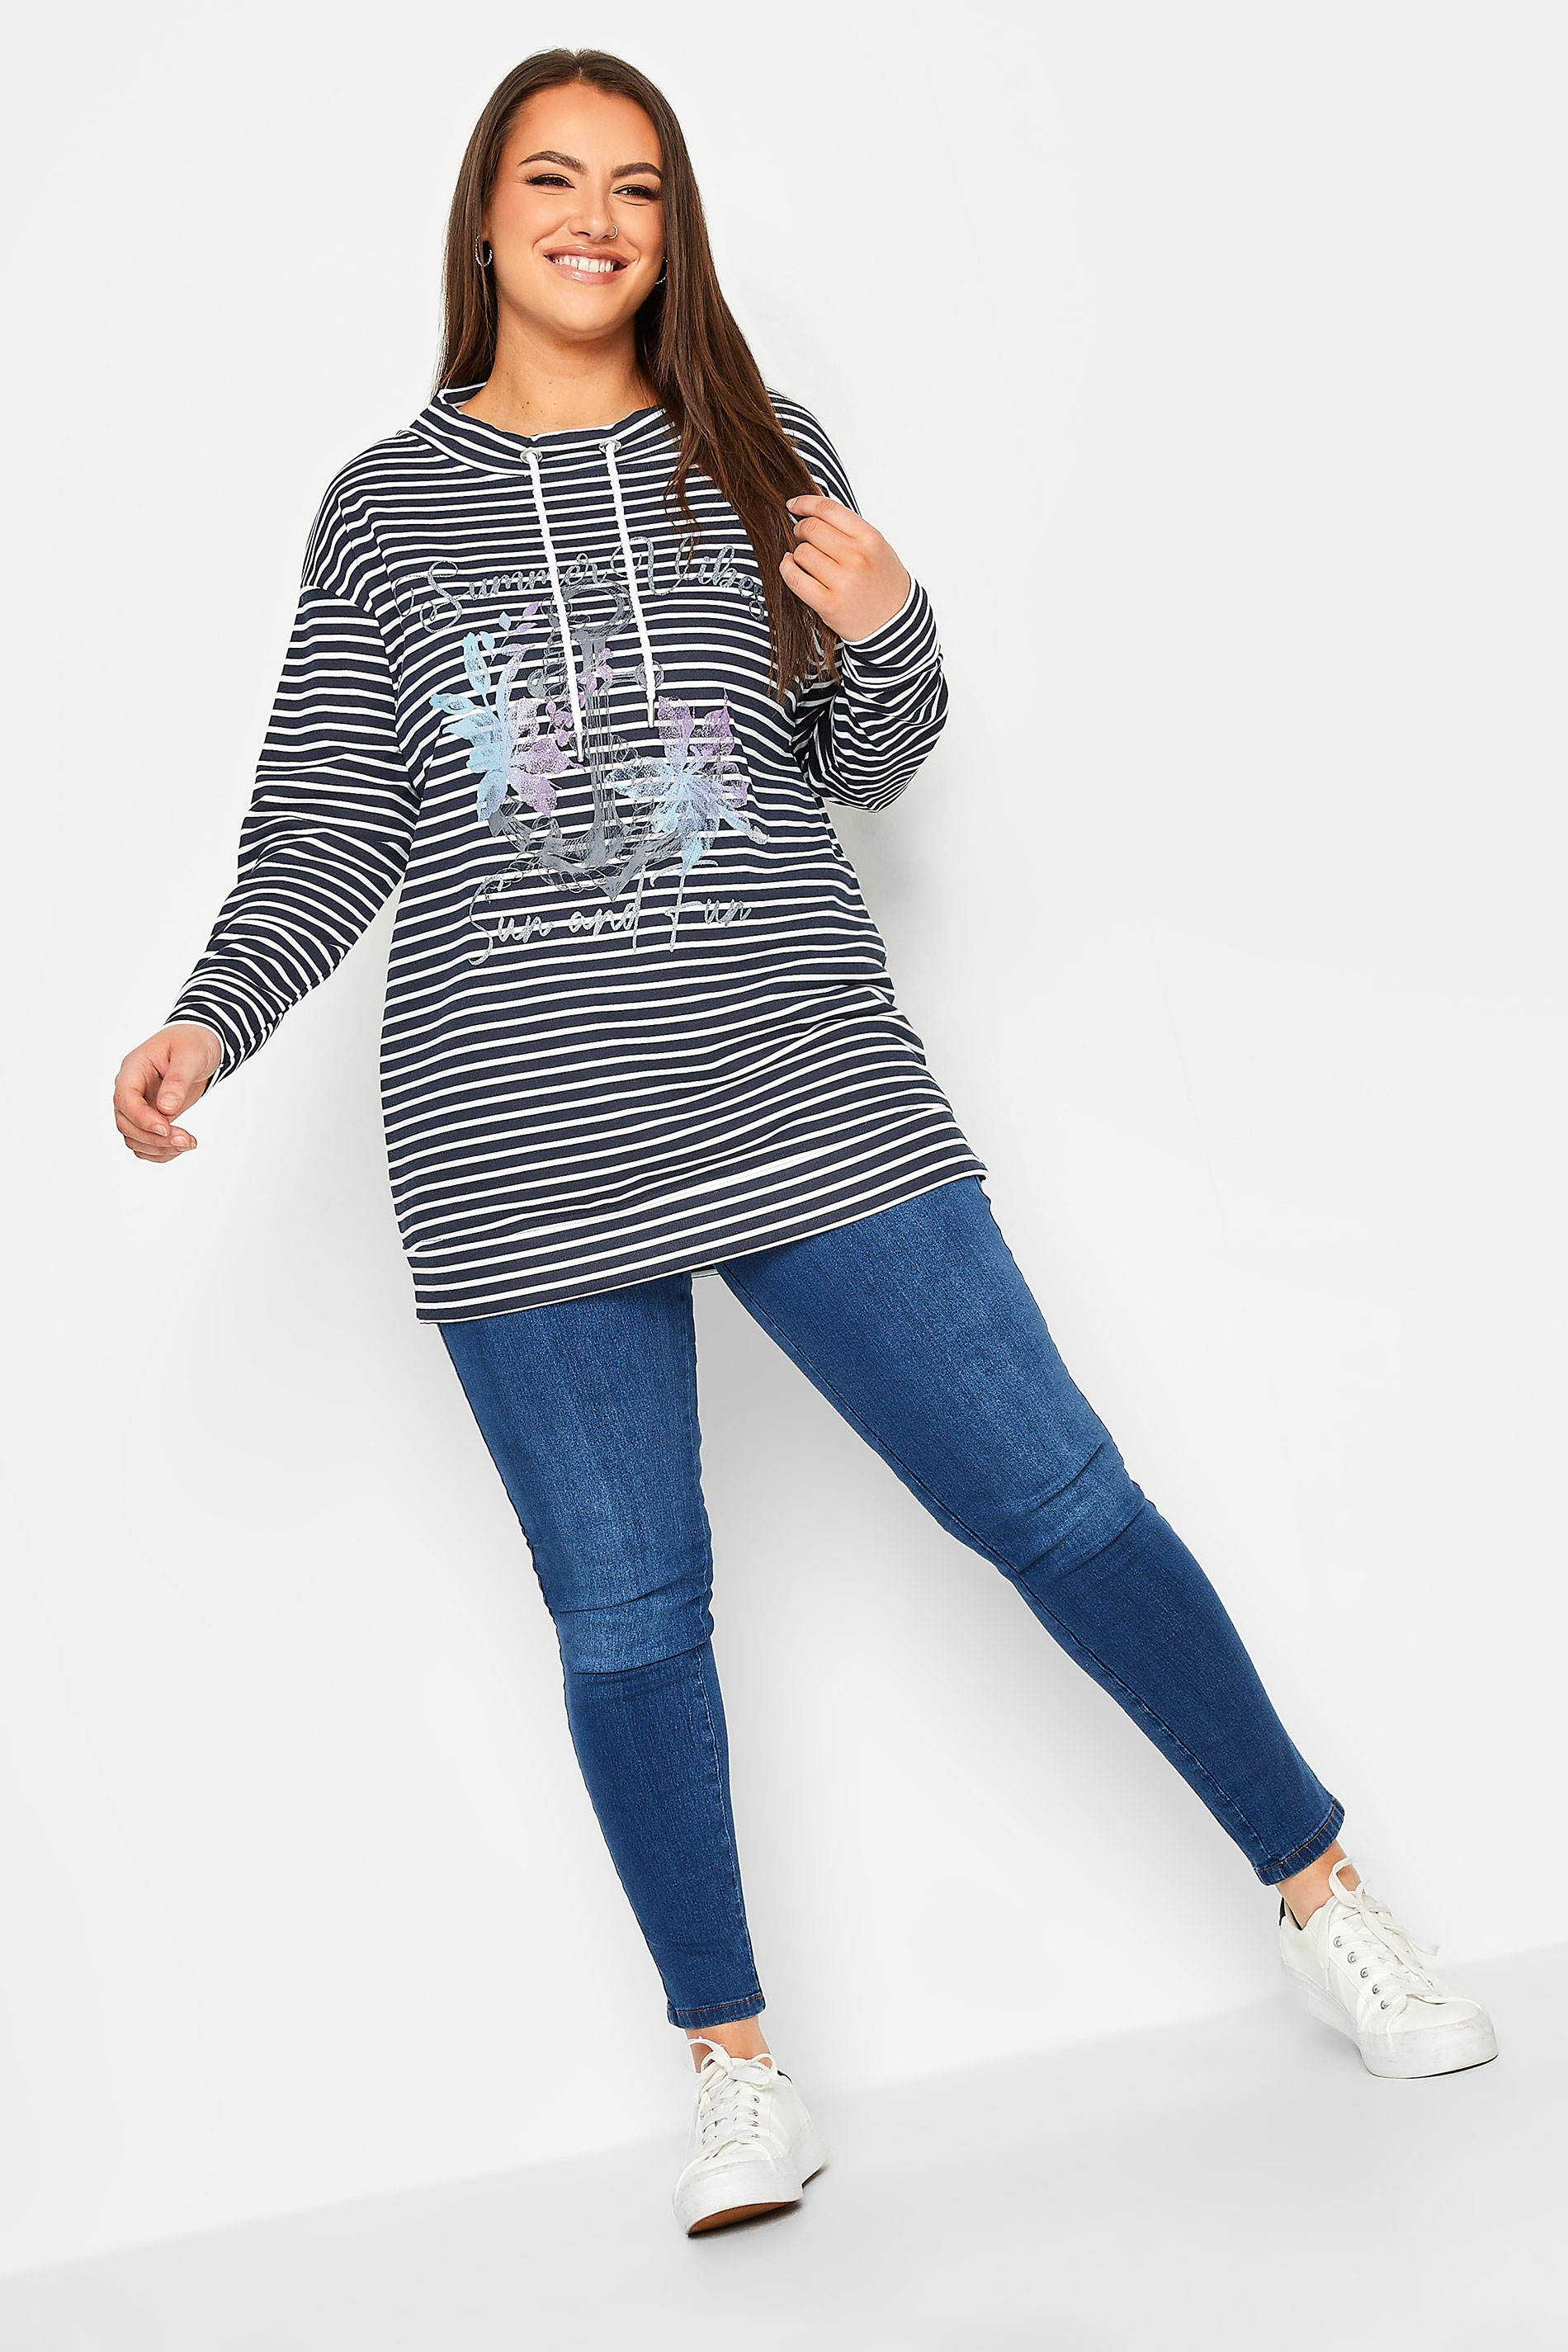 YOURS Curve Navy Blue & White Stripe Anchor Print Sweatshirt | Yours Clothing 2